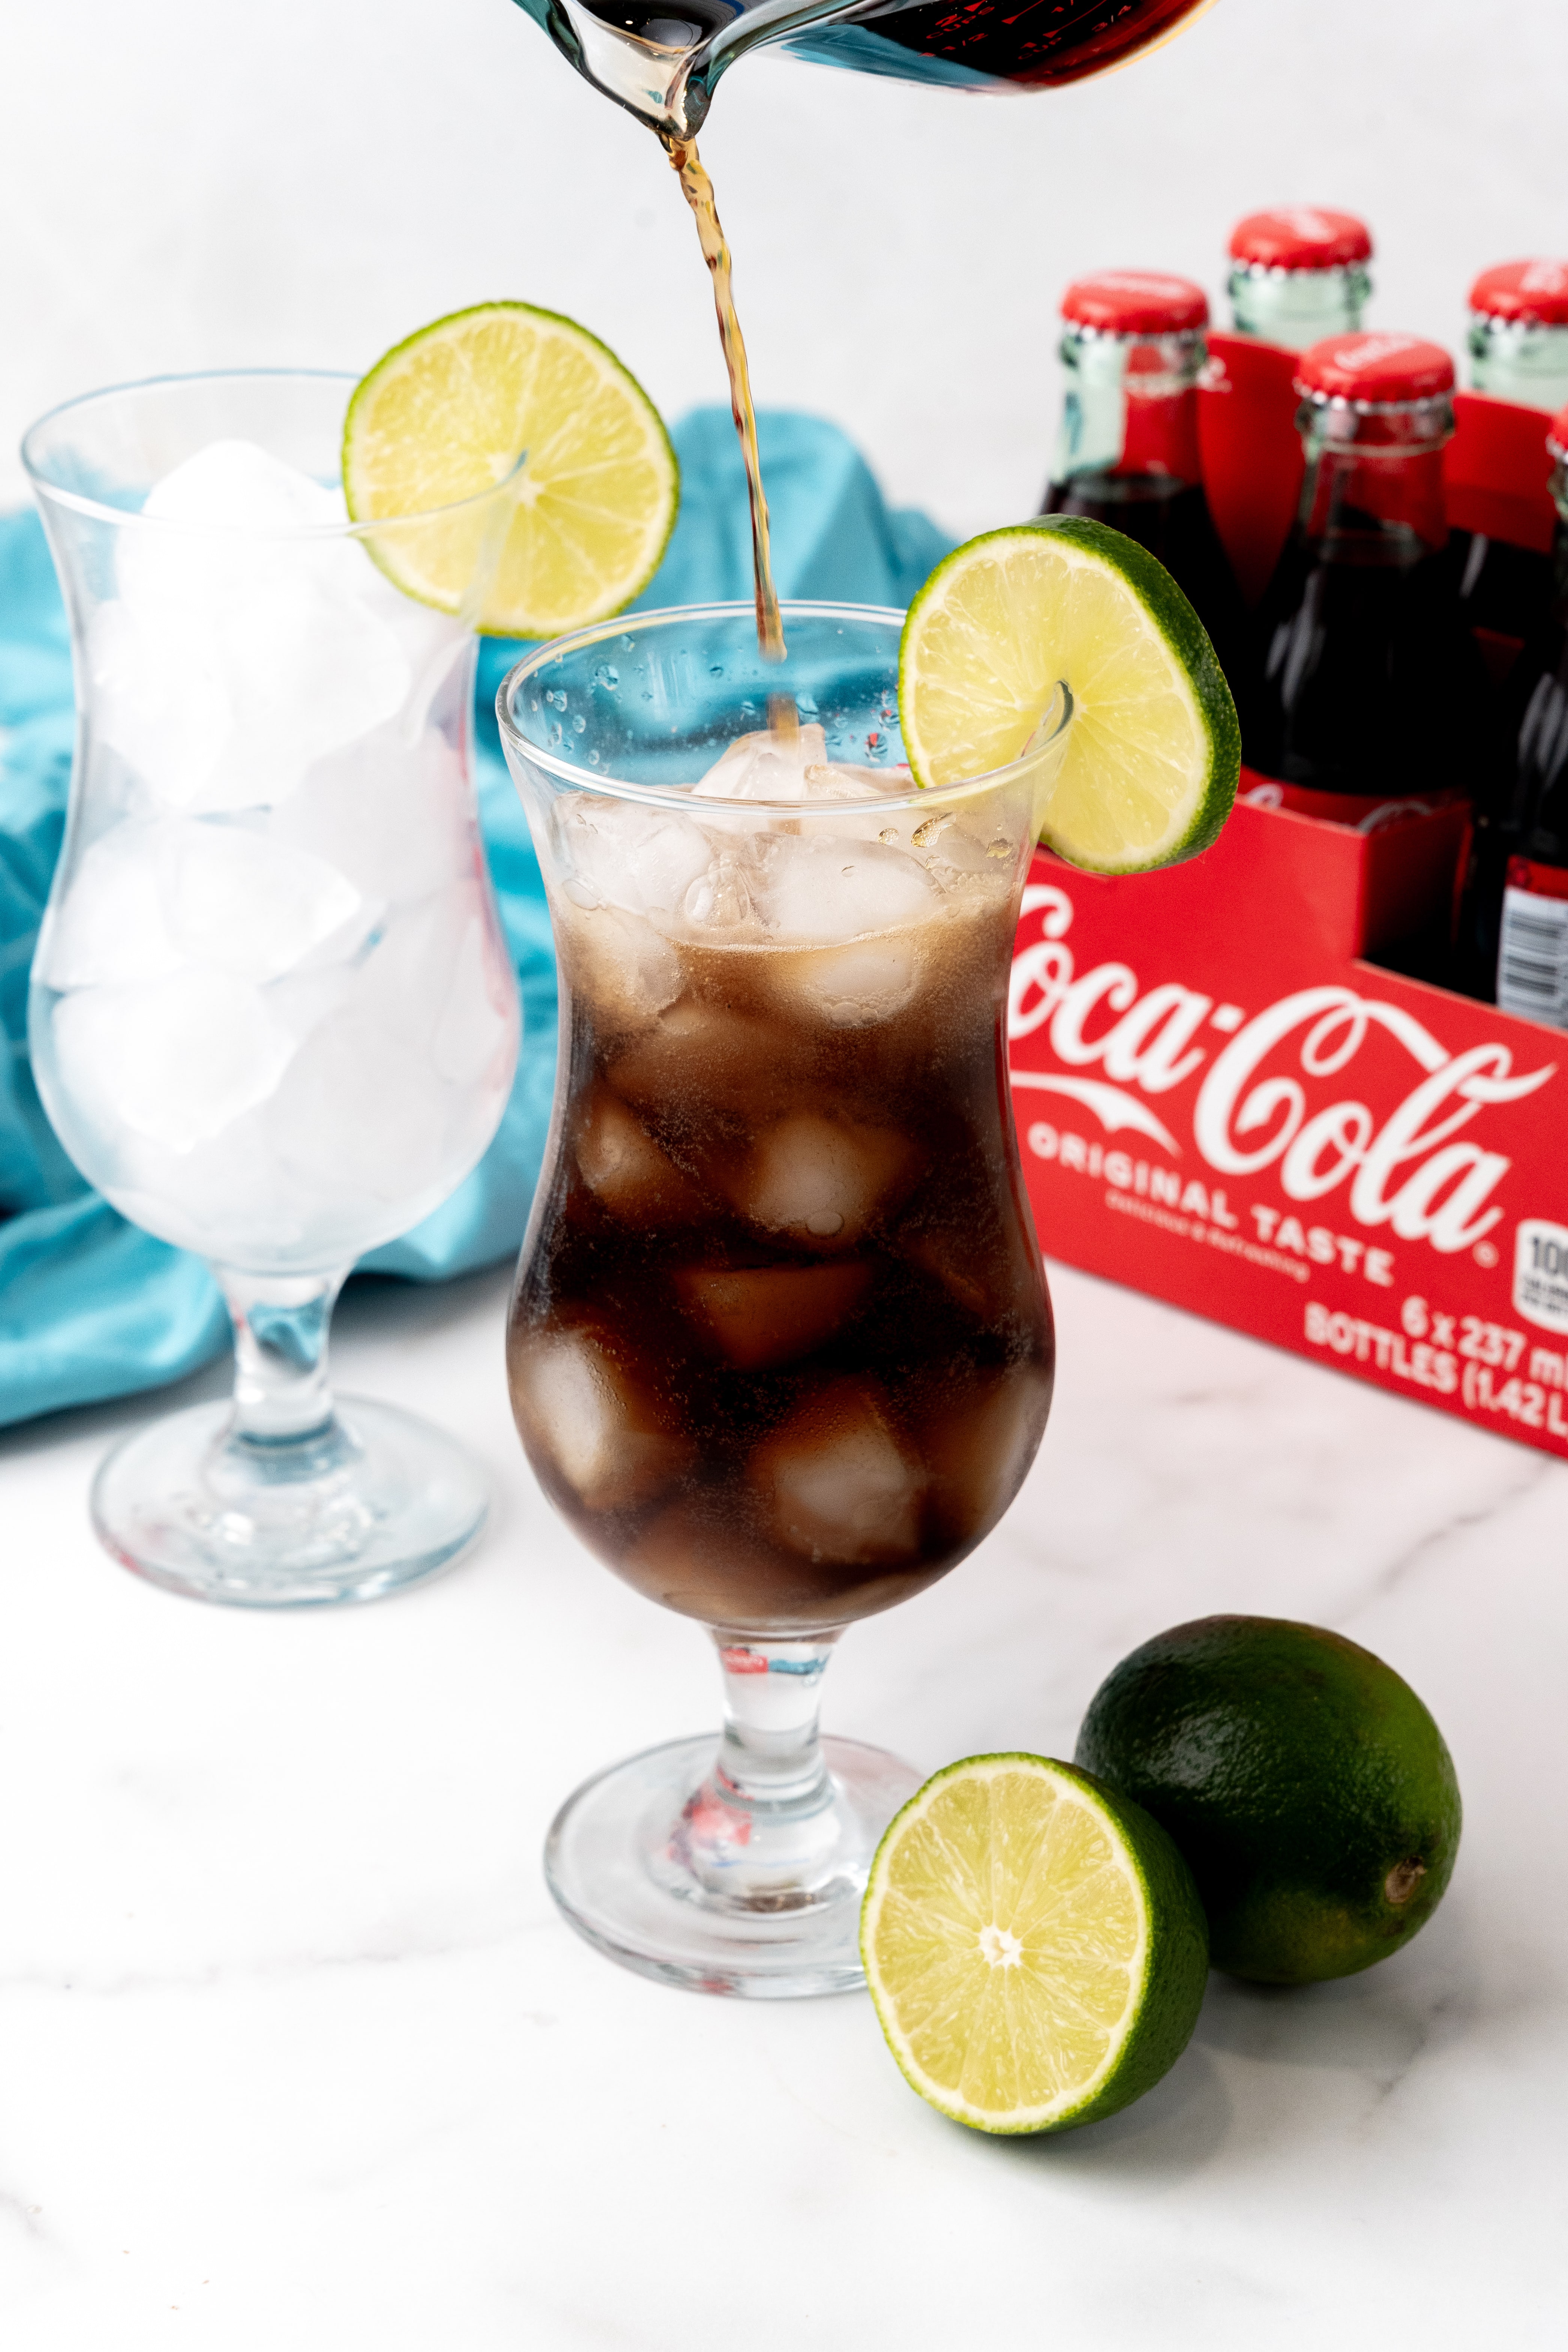 cocoa cola soda being poured over ice in to a drinking glass